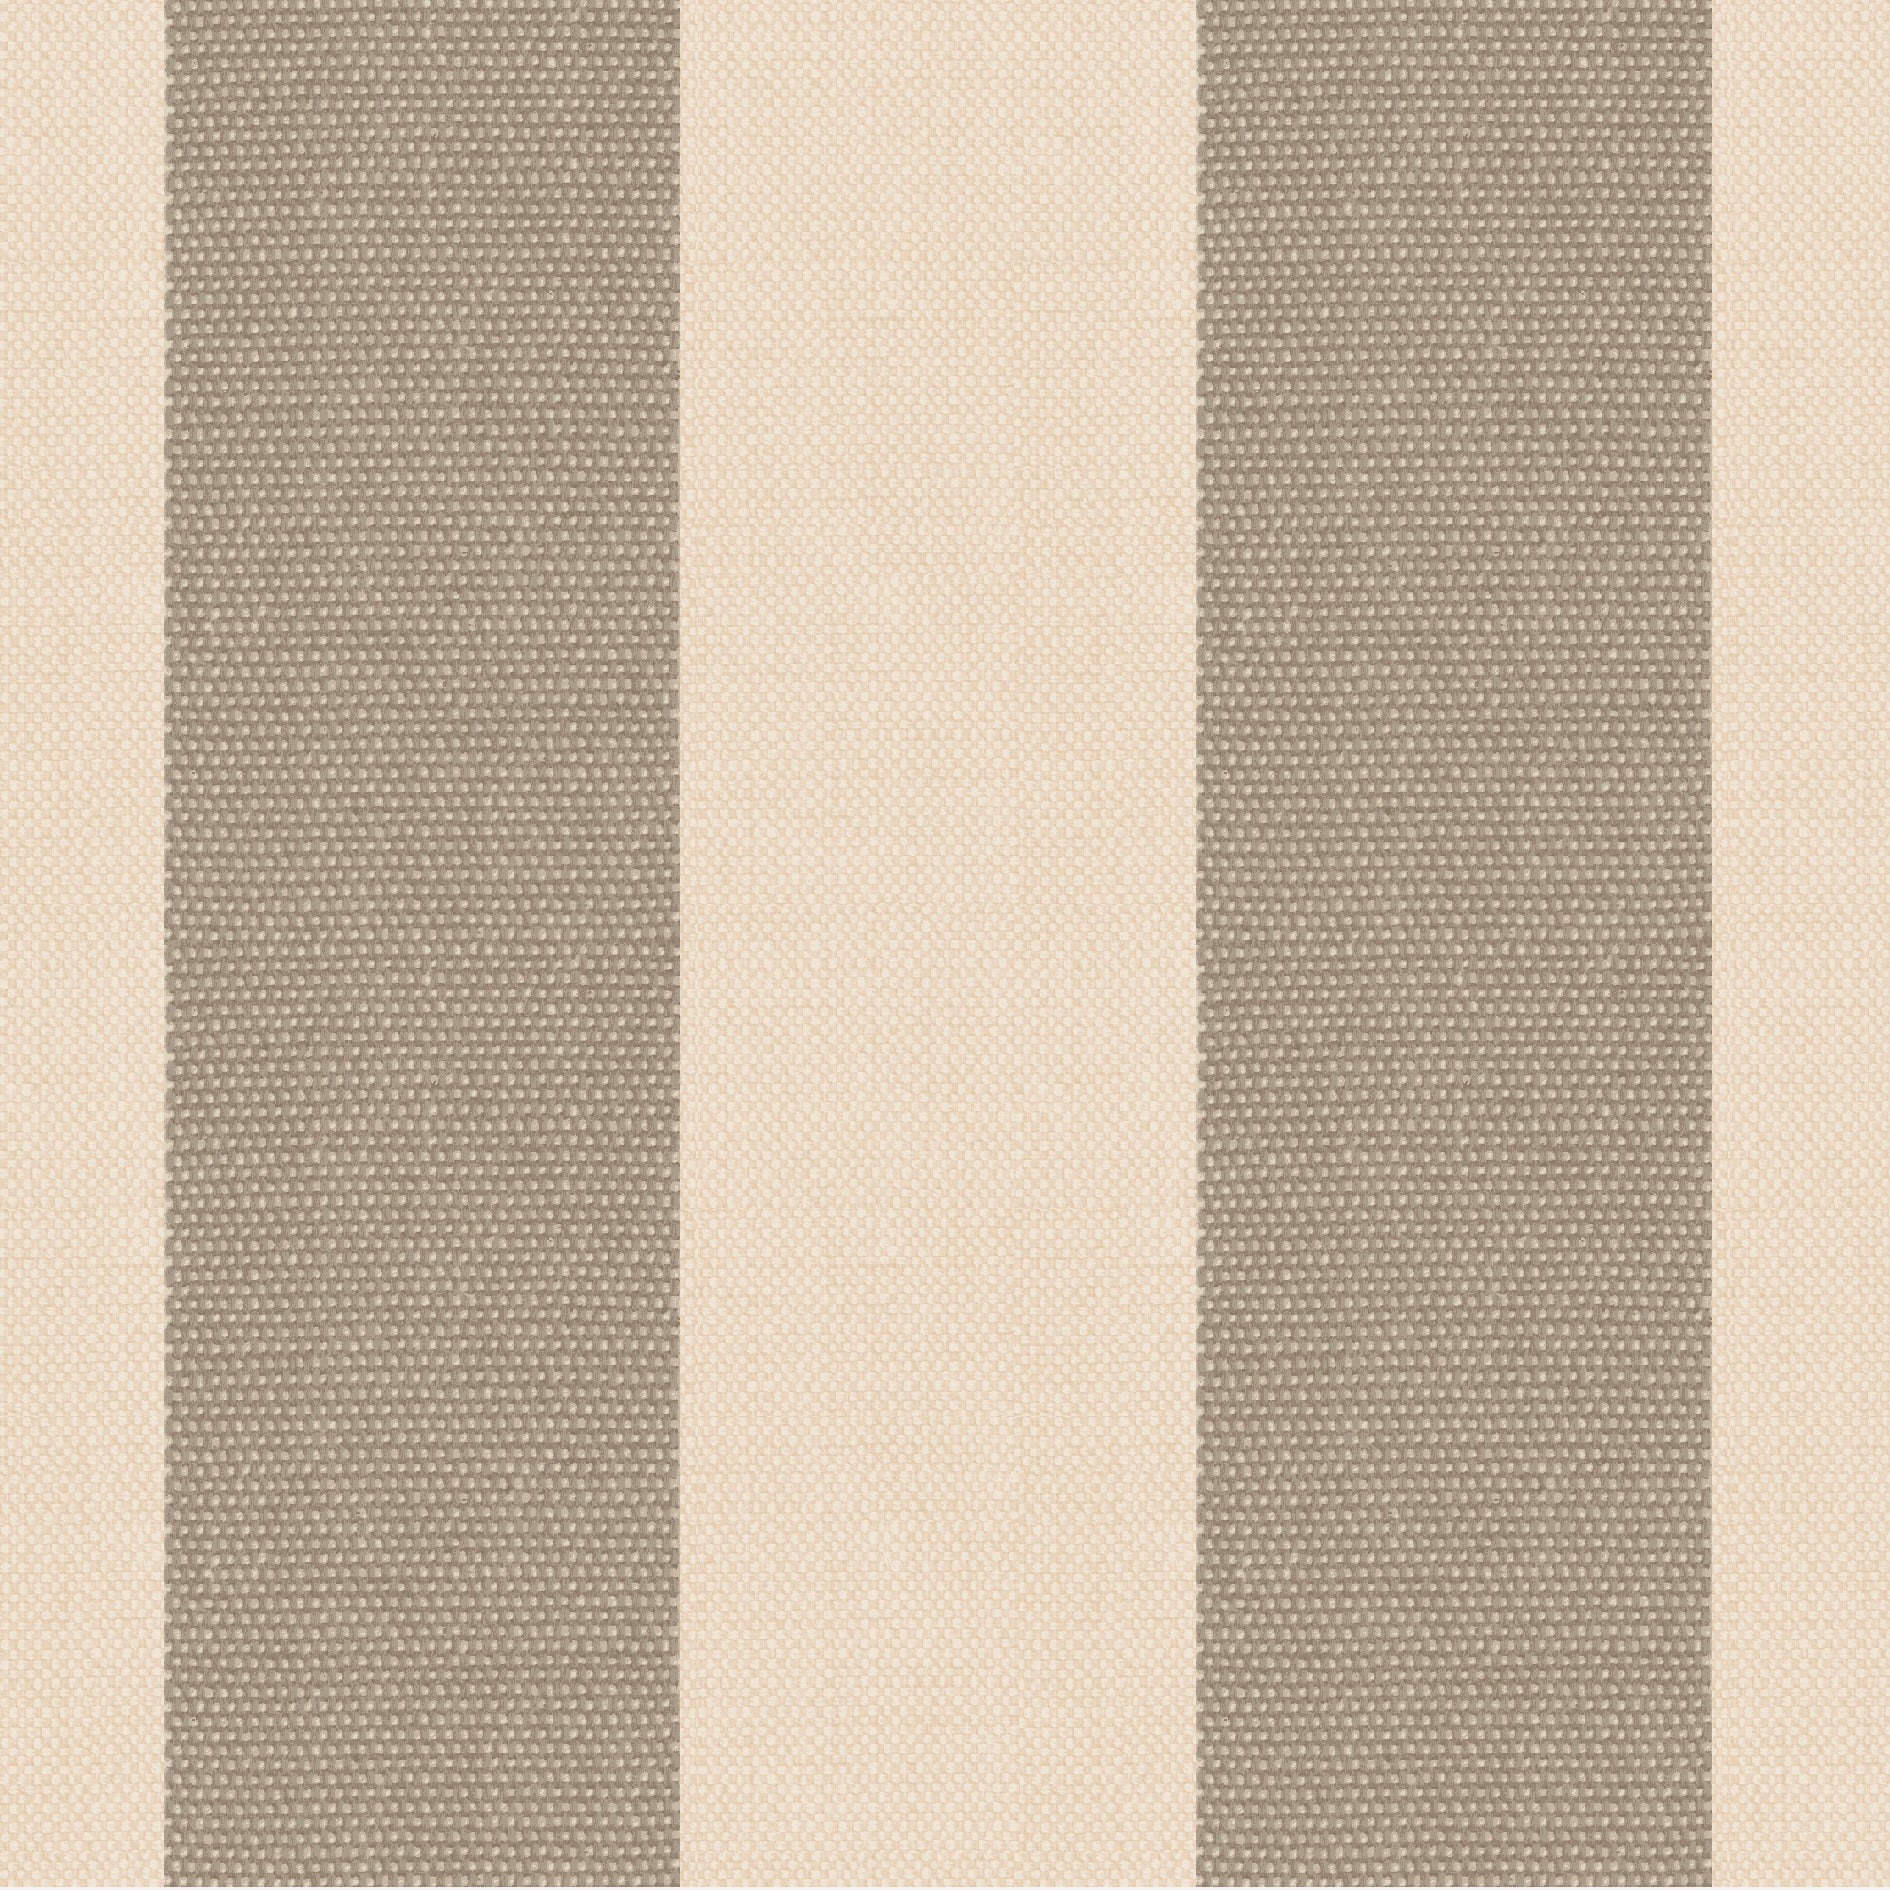 Beatrice Daylight Stripe Made to Measure Roller Blind Fabric Sample Beatrice Natural